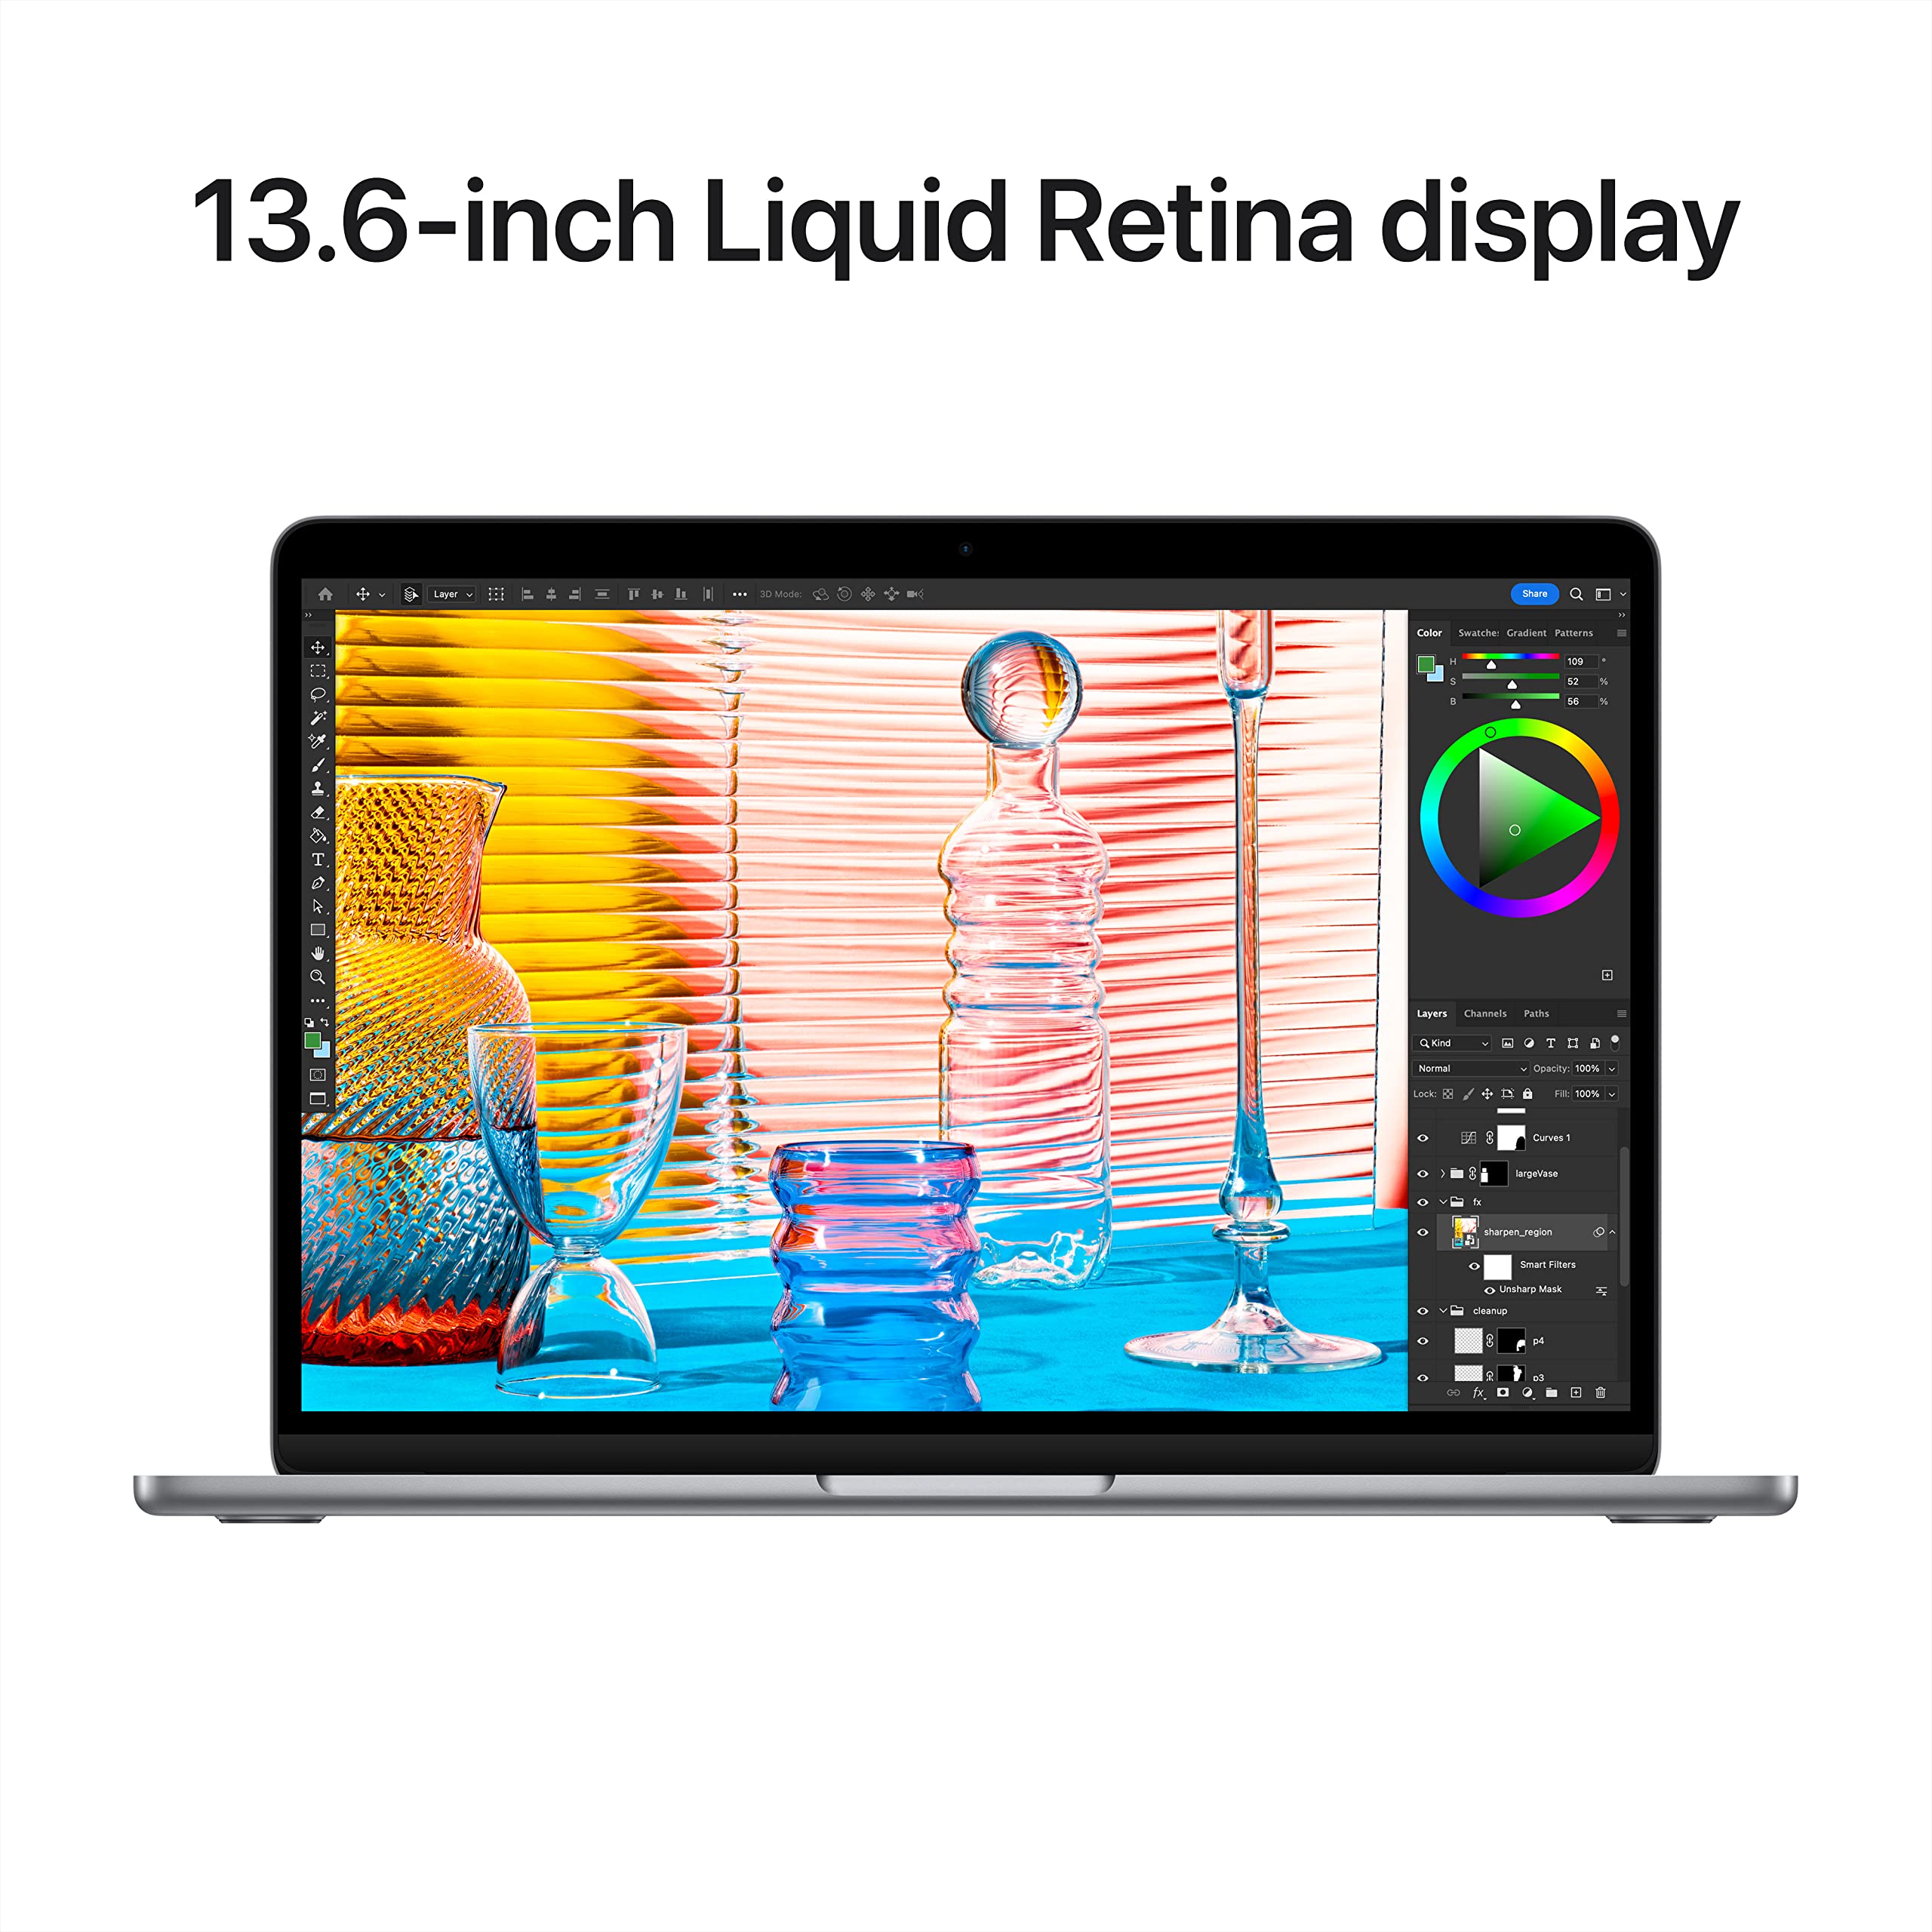 Apple 2022 MacBook Air Laptop with M2 chip: 13.6-inch Liquid Retina Display, 8GB RAM, 512GB SSD Storage, Backlit Keyboard, 1080p FaceTime HD Camera. Works with iPhone and iPad; Space Gray